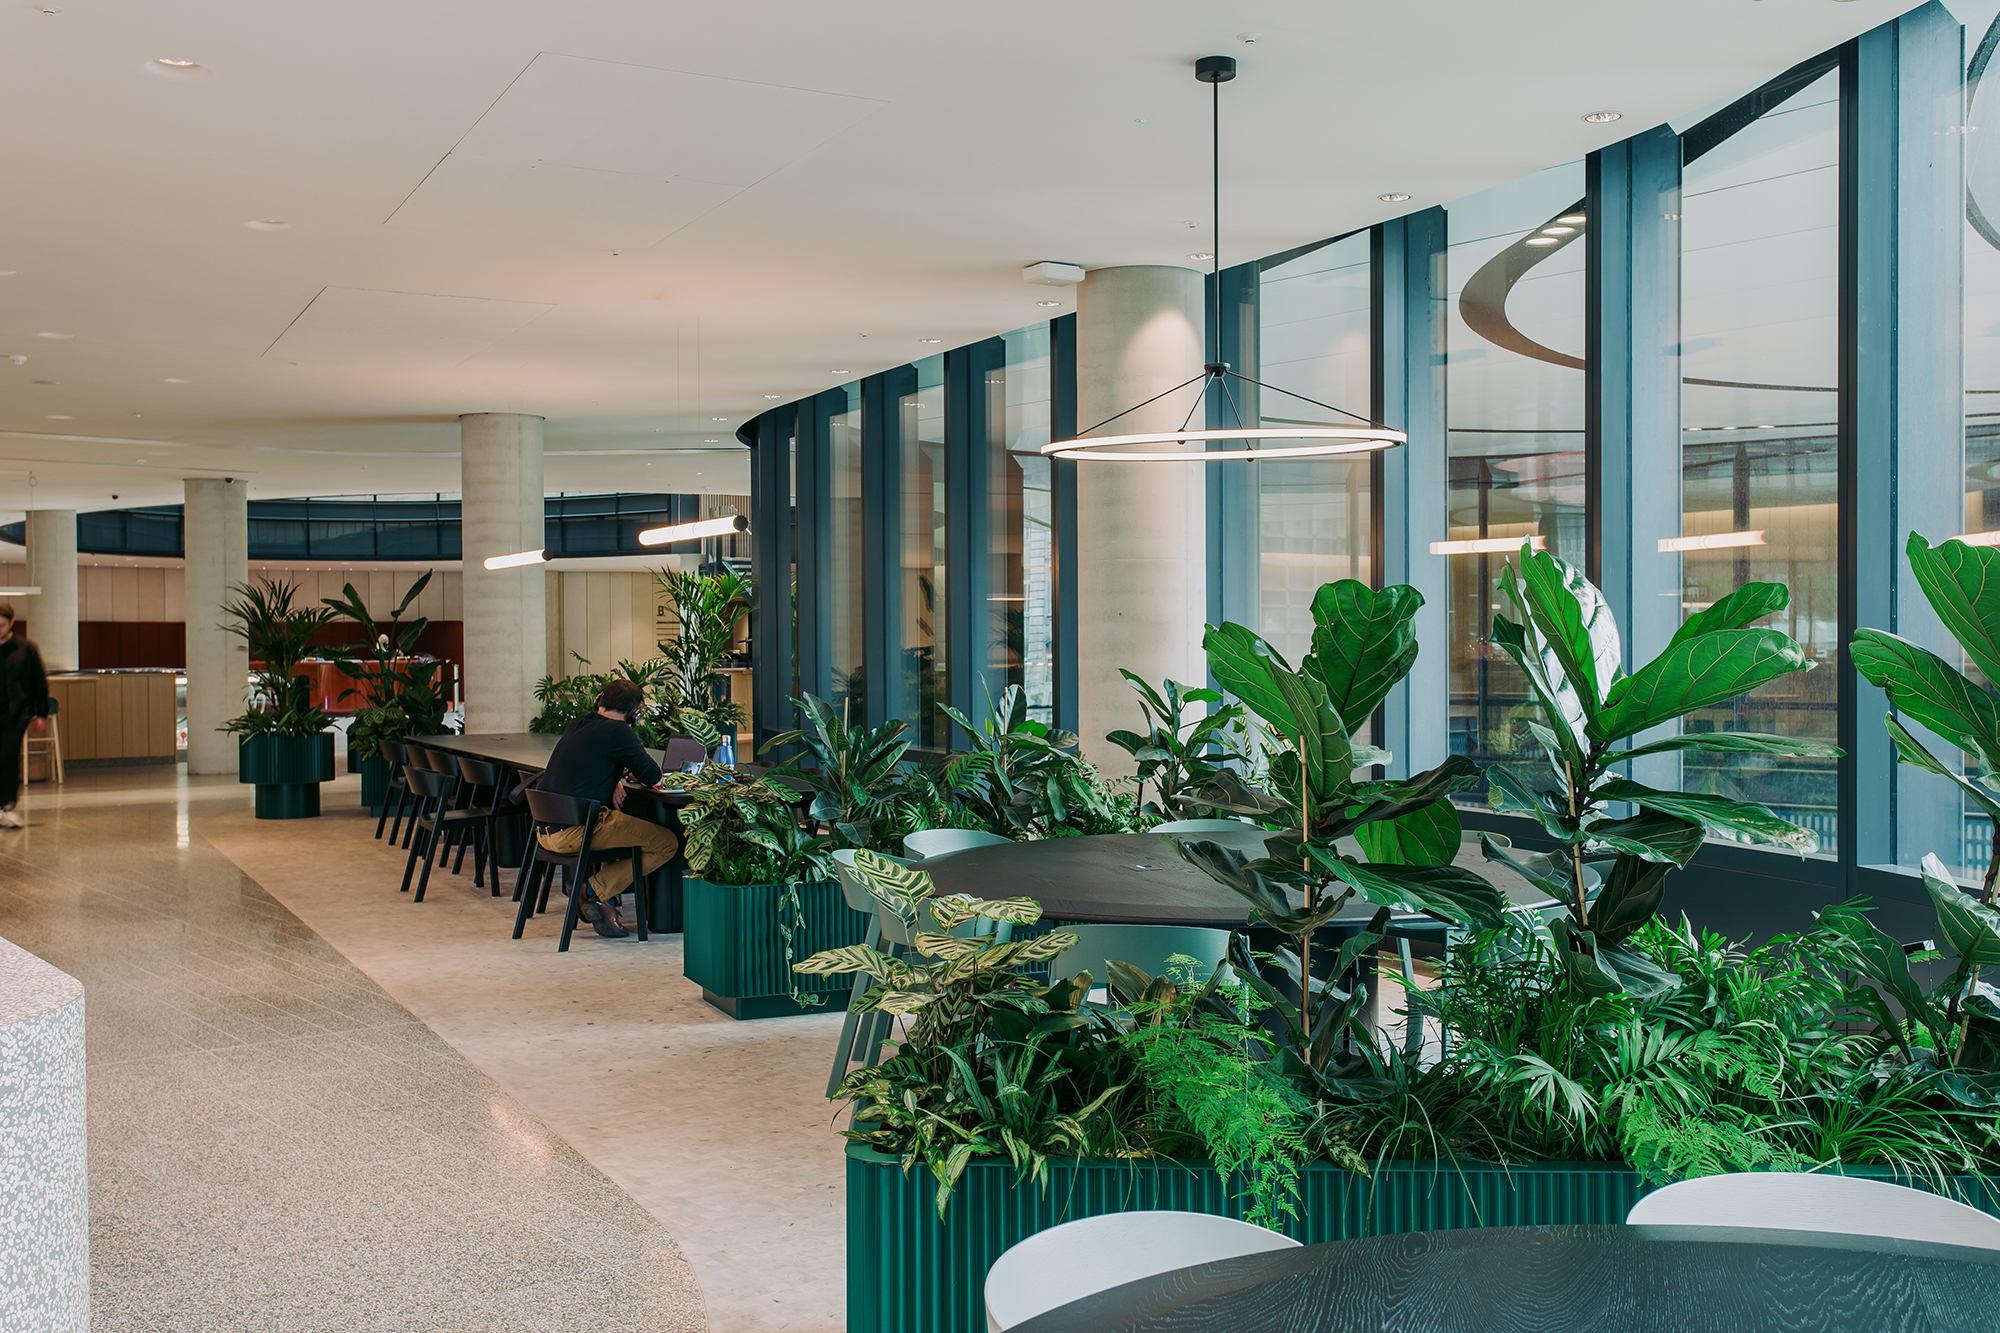 Seating area in an office with large leaved plants